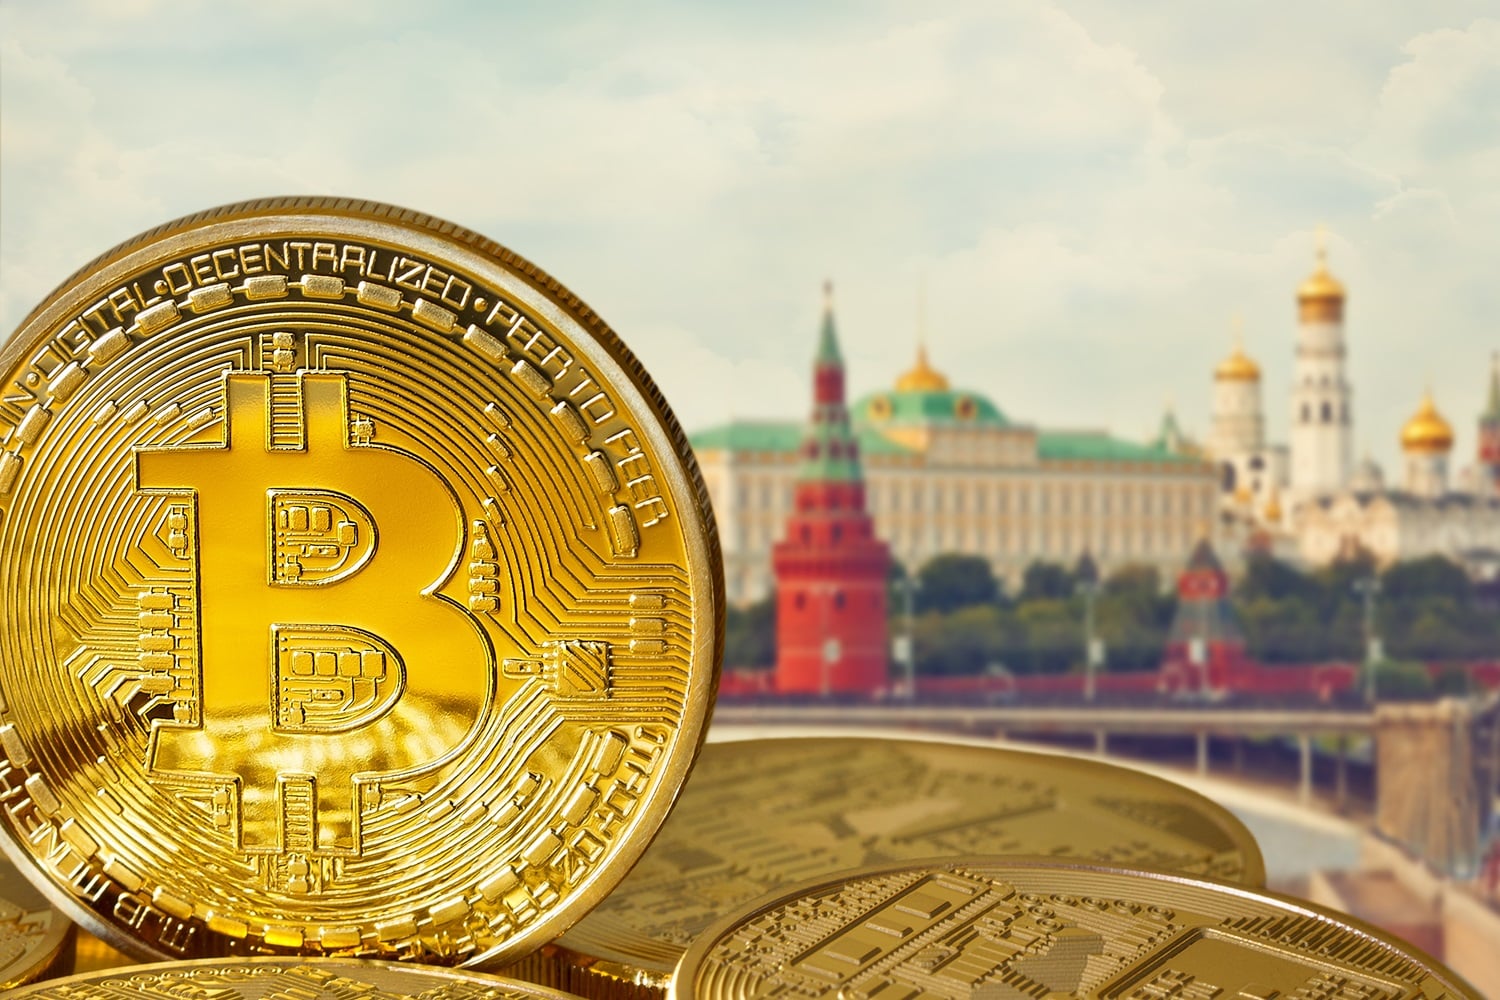 Metal tokens intended to represent Bitcoin against the background of the Kremlin in Moscow, Russia.